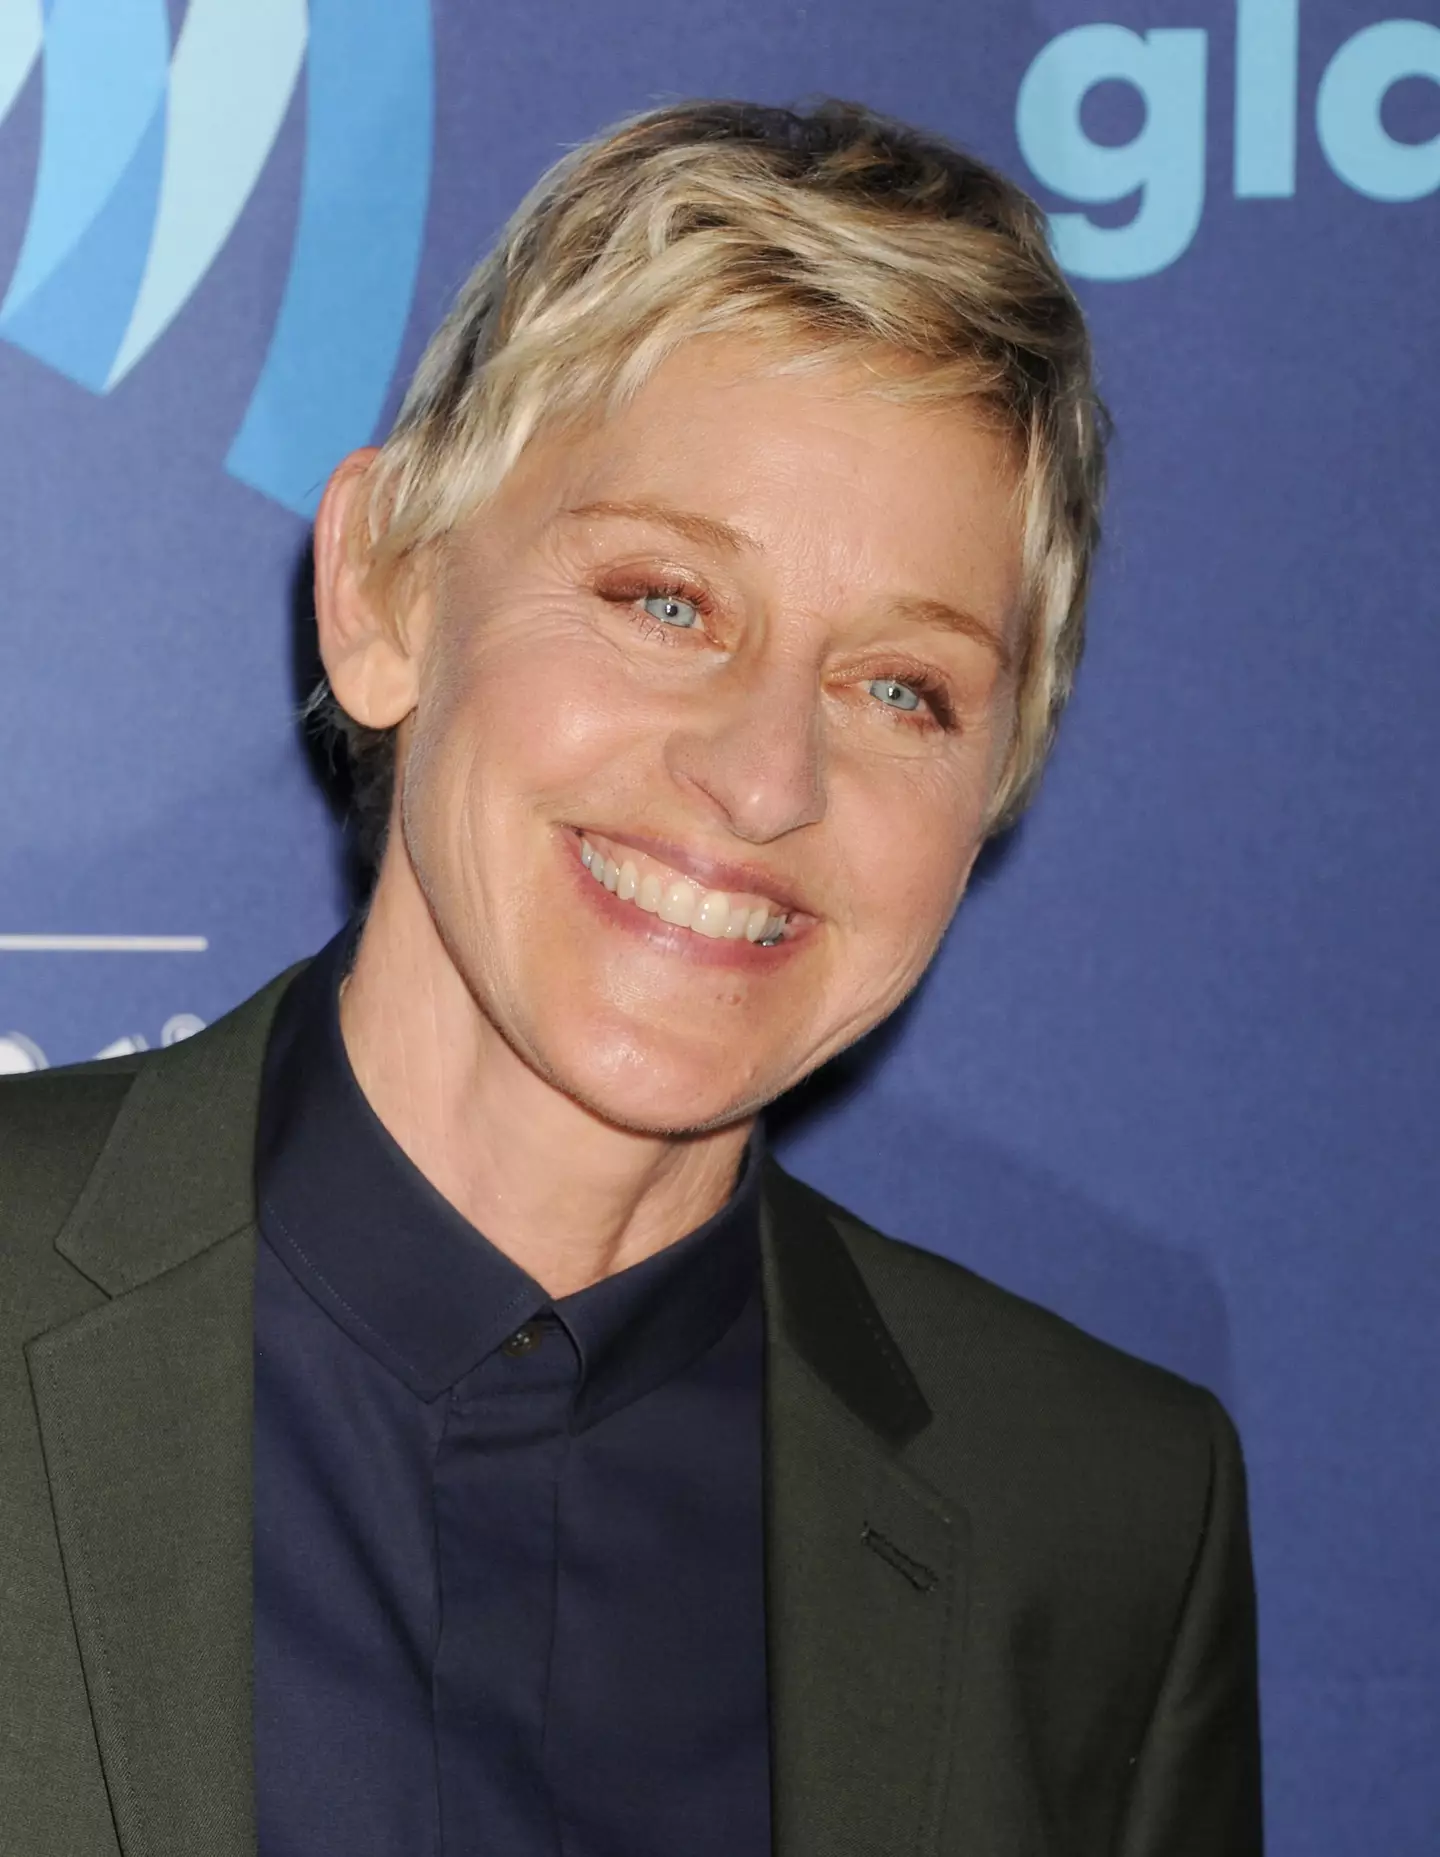 One viewer said: “This is why people don’t like Ellen anymore.”